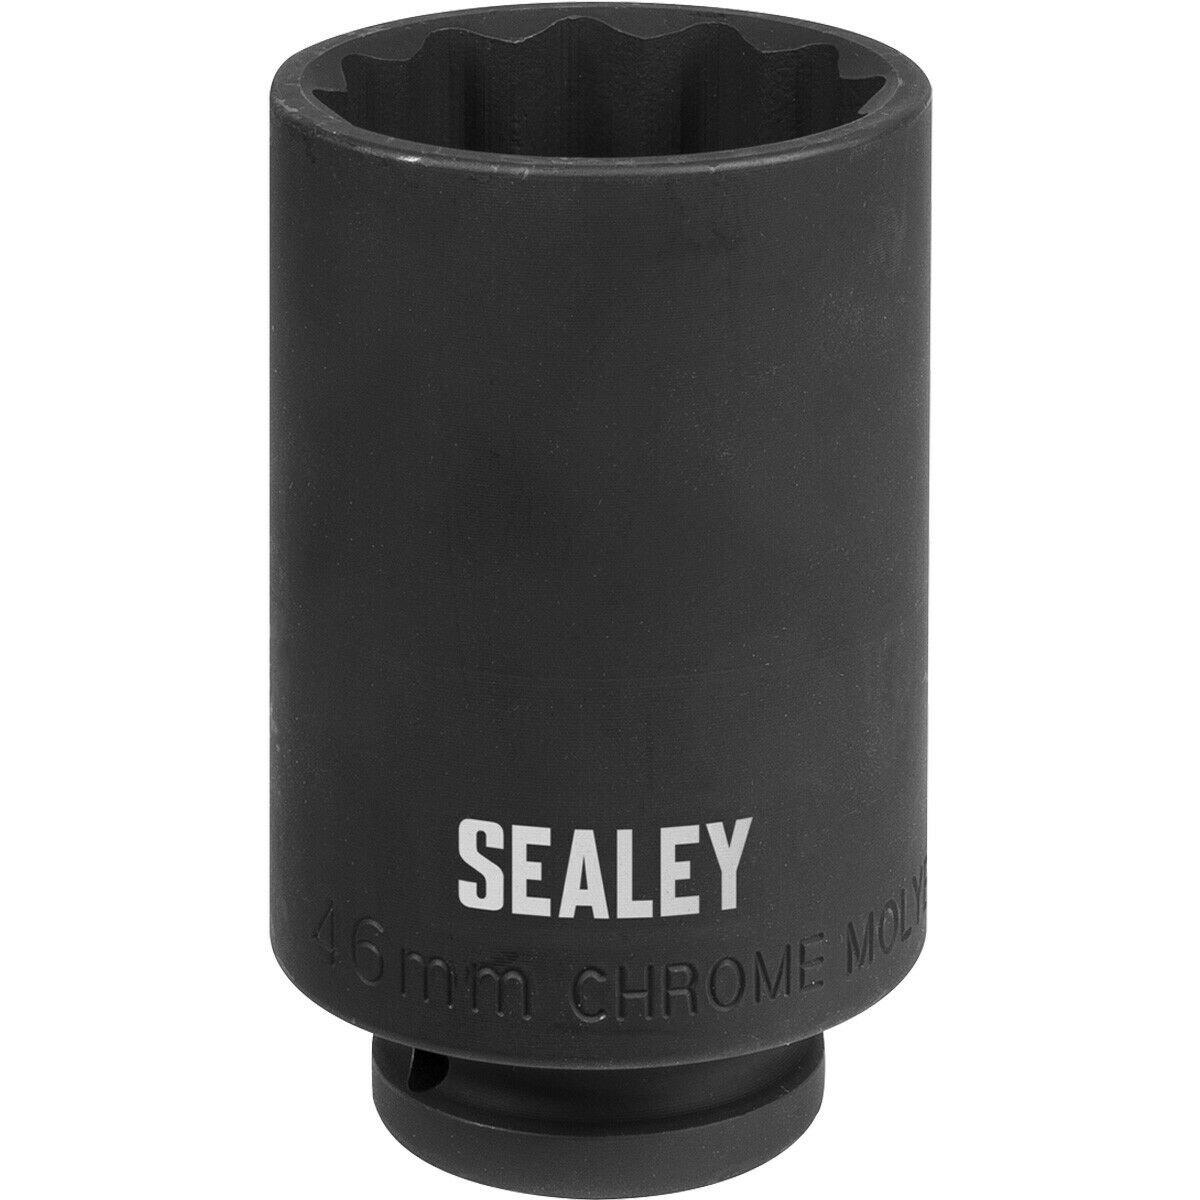 46mm DEEP Impact Socket Bit - 12-Point Ball Joint - For Renault & Vauxhall